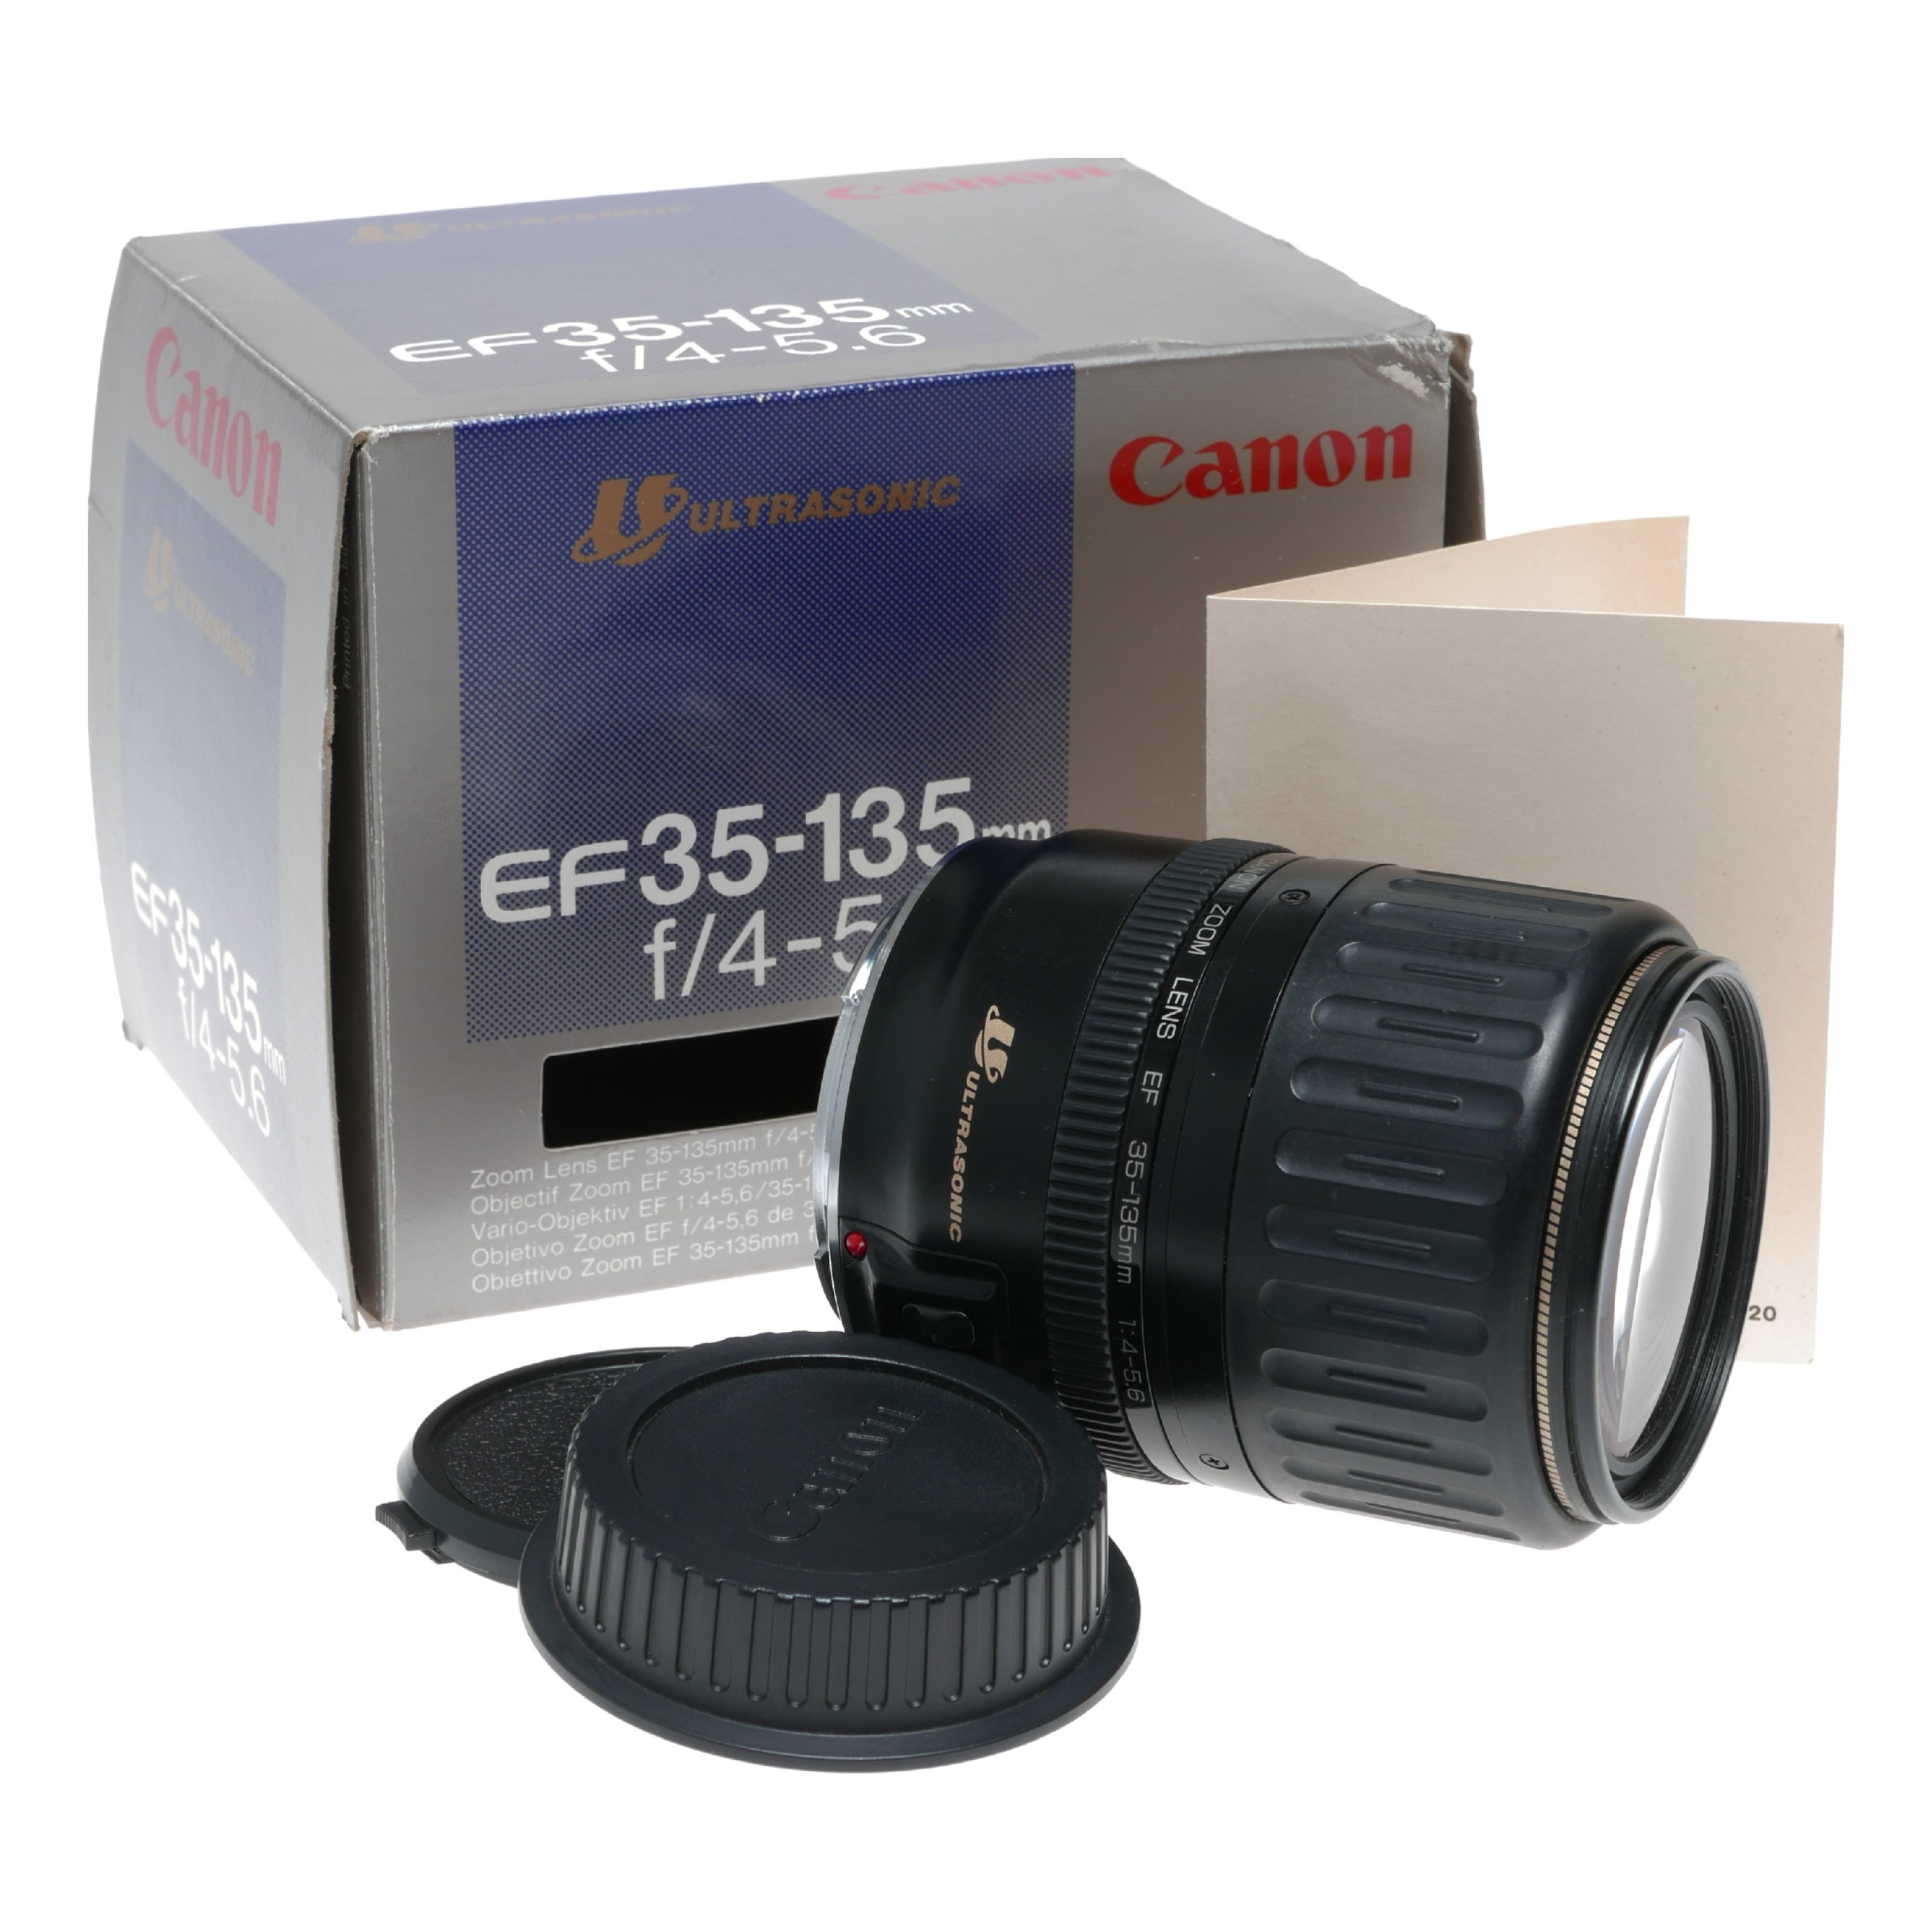 Canon Ultrasonic EF 35-135mm f4-5.6 zoom lens boxed excellent